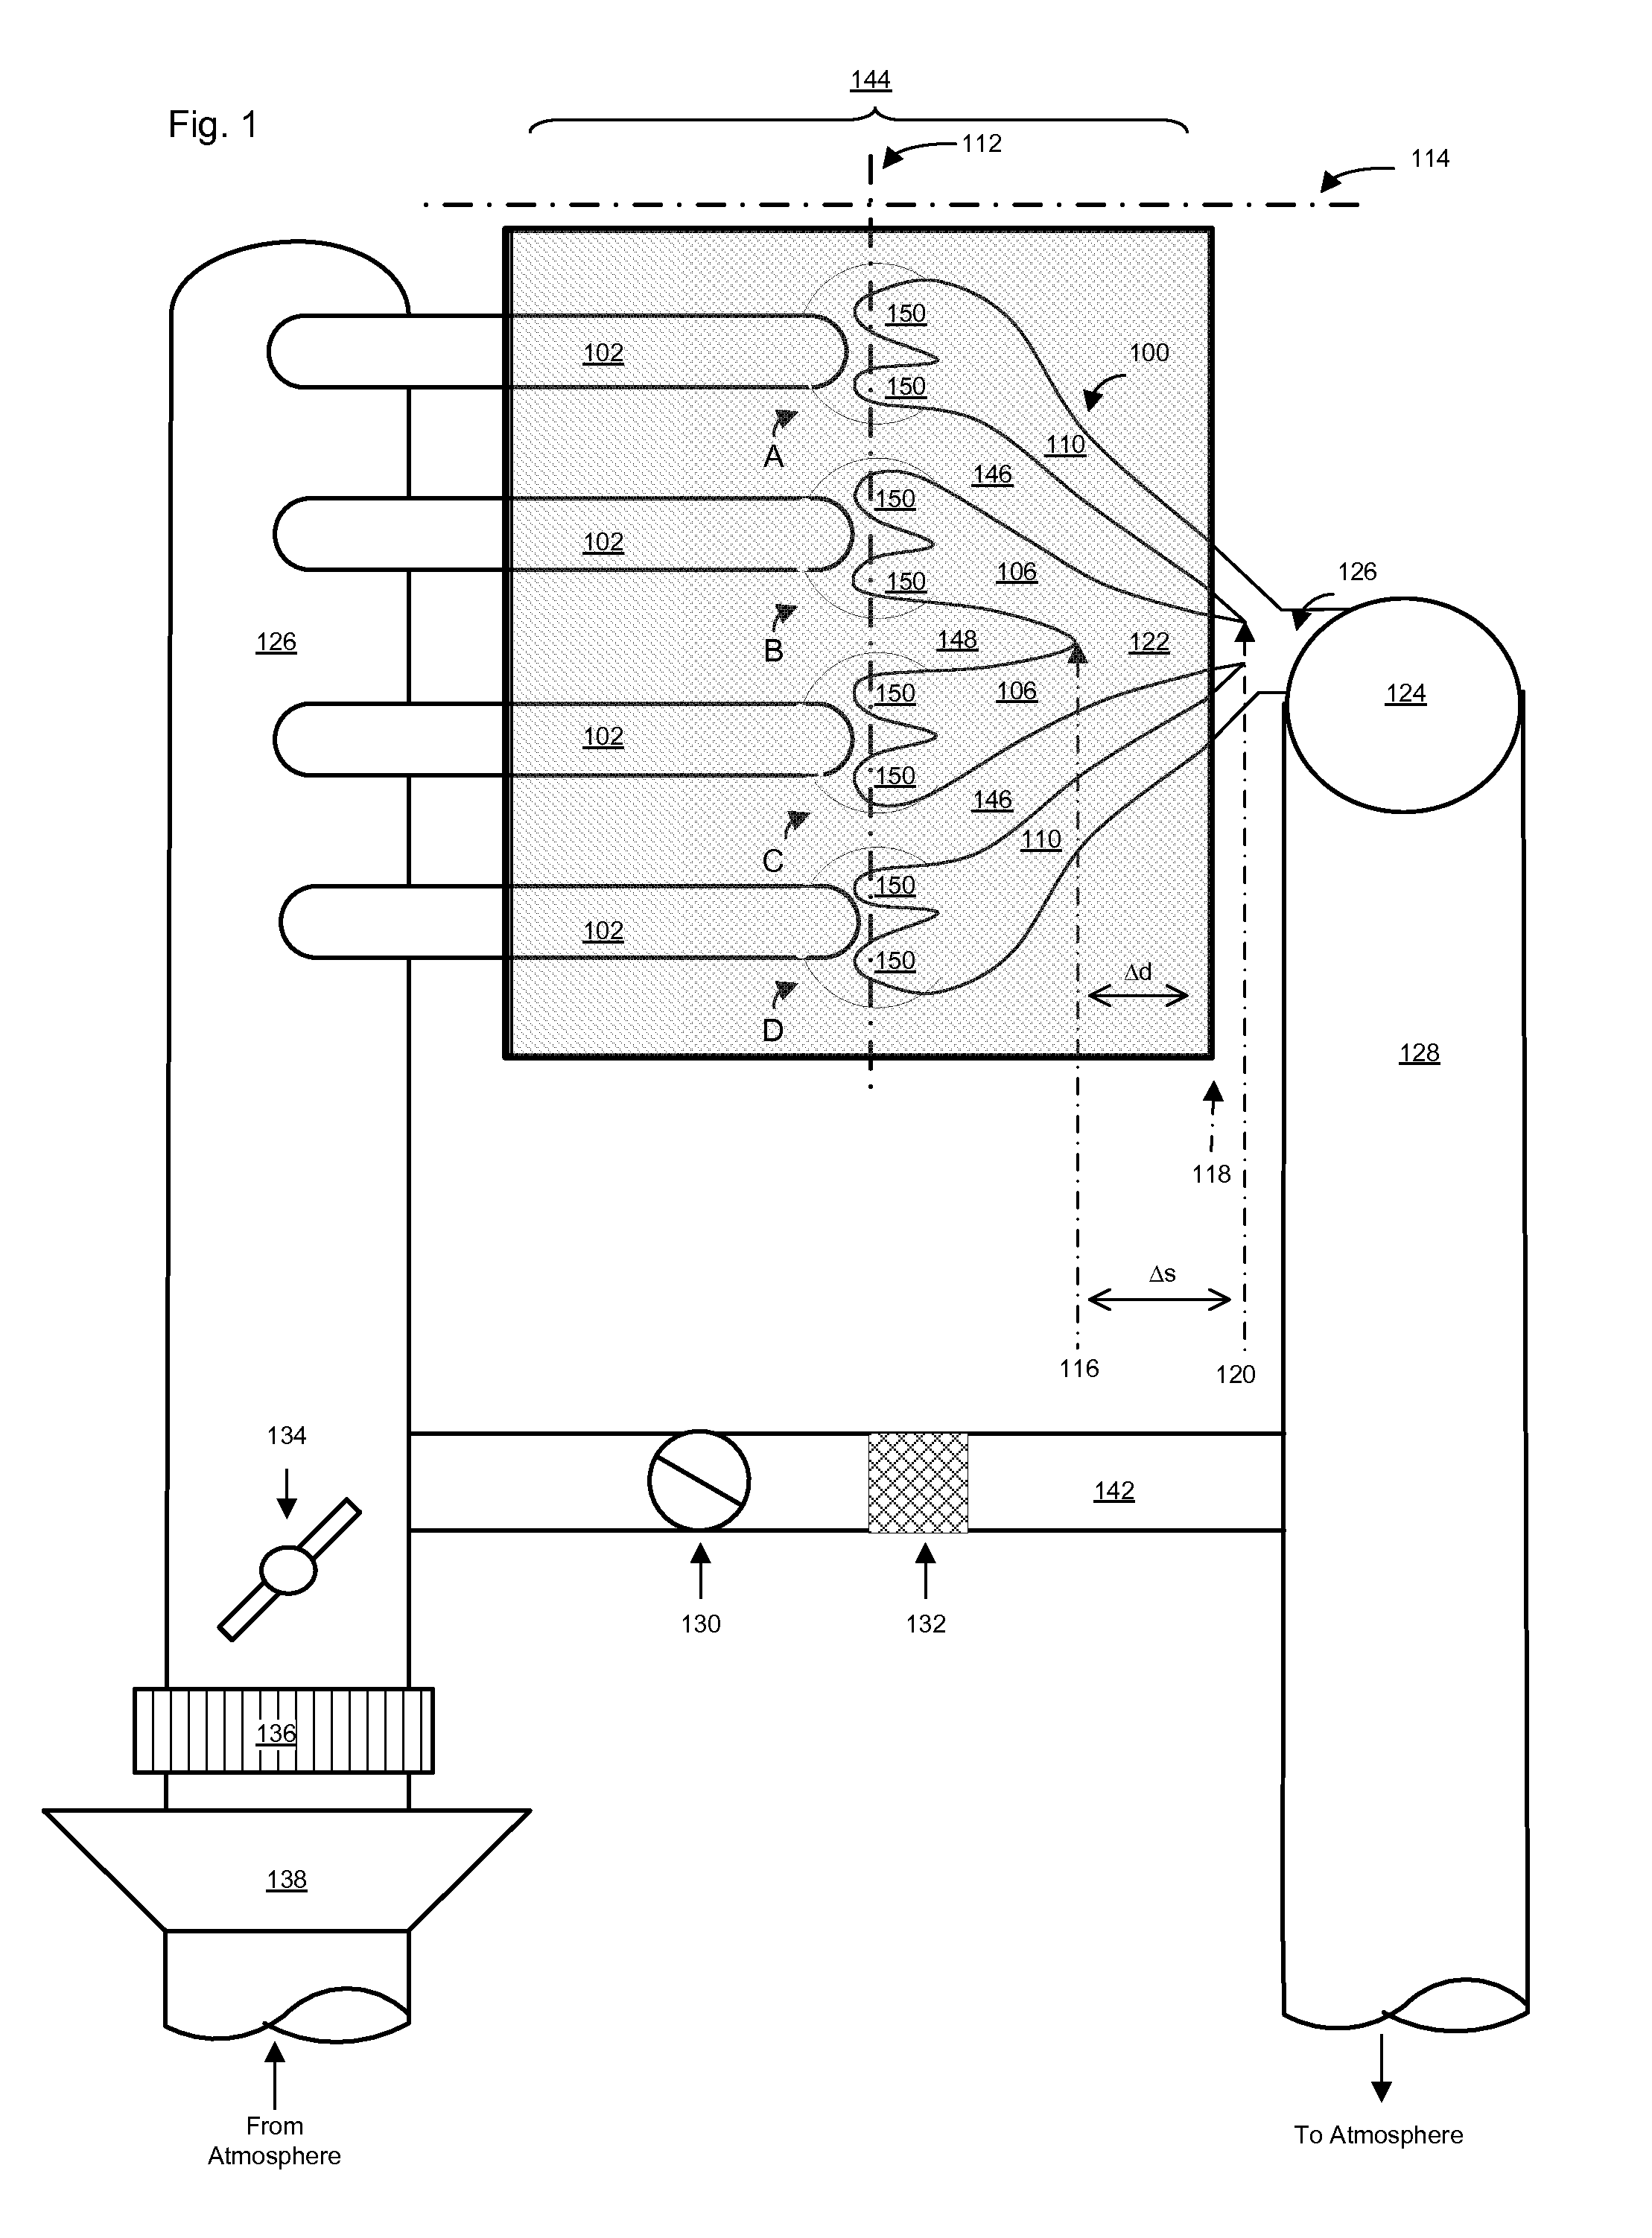 Multi-cylinder internal combustion engine and method for operating such a multi-cylinder internal combustion engine